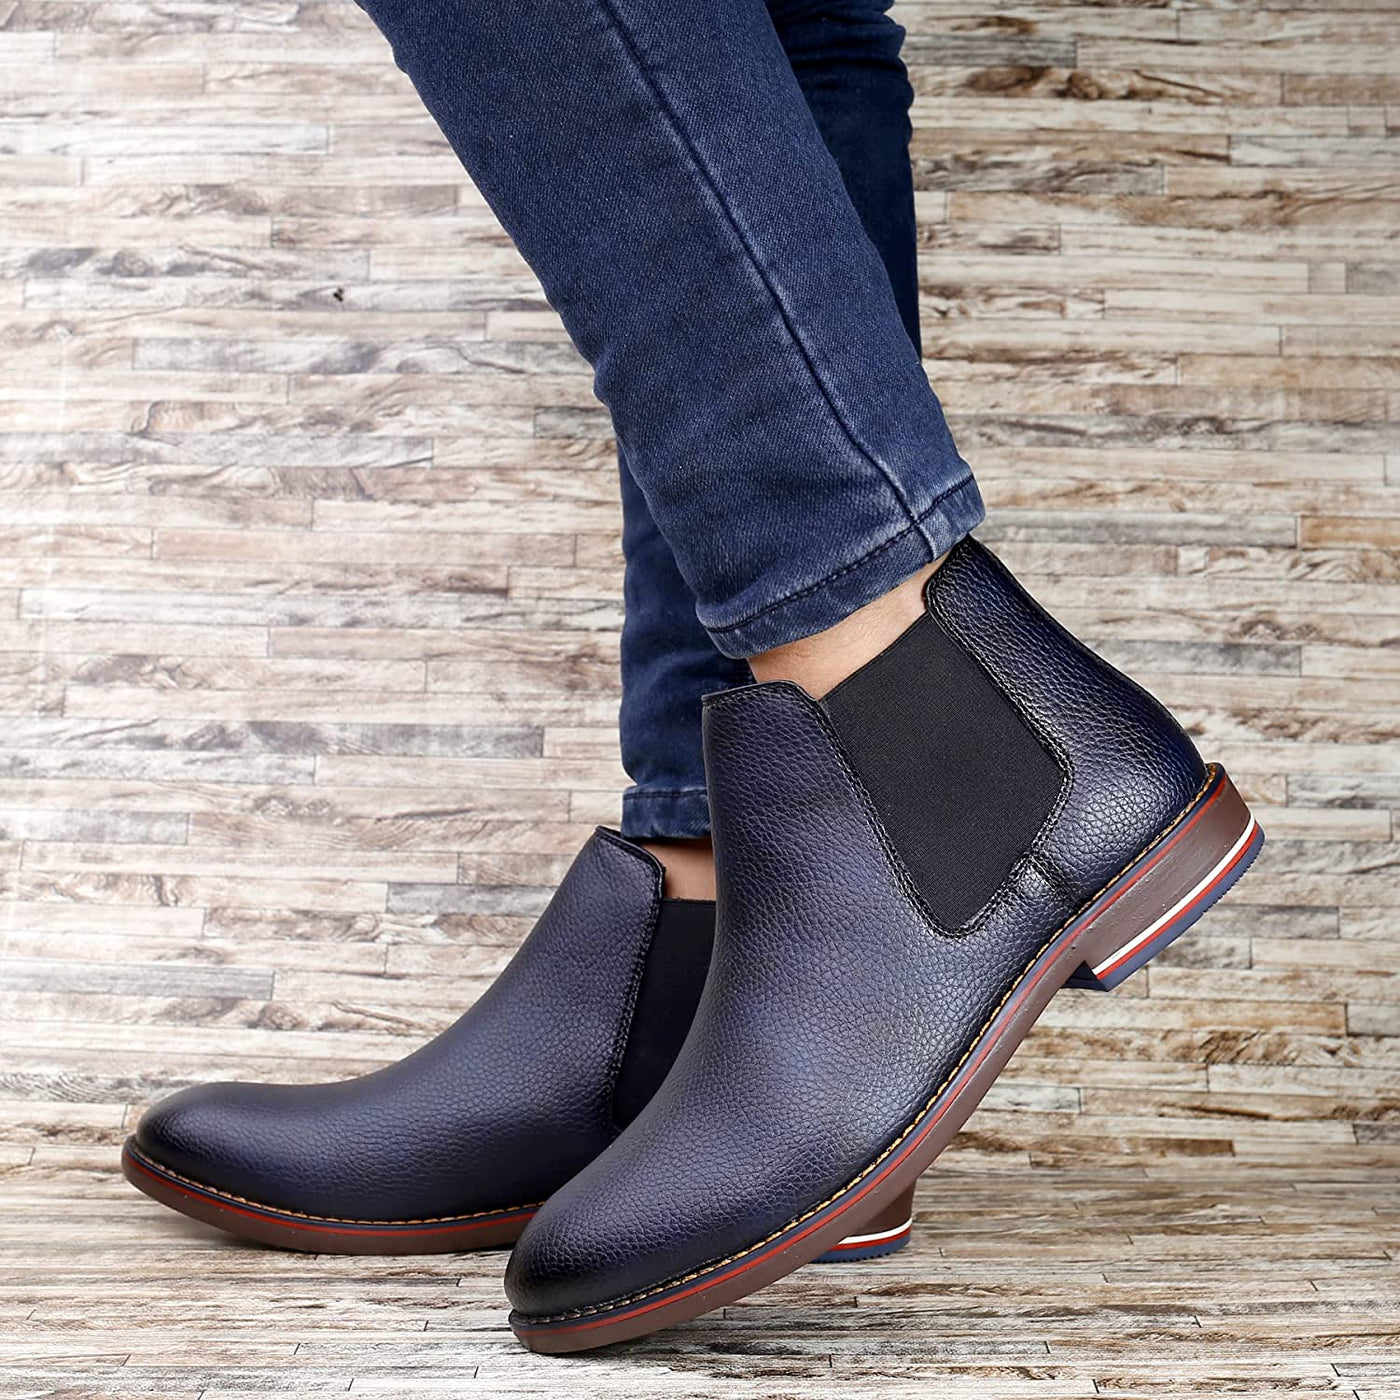 Classy Ankle British Design Blue Chelsea Boots For Men-Unique and Classy